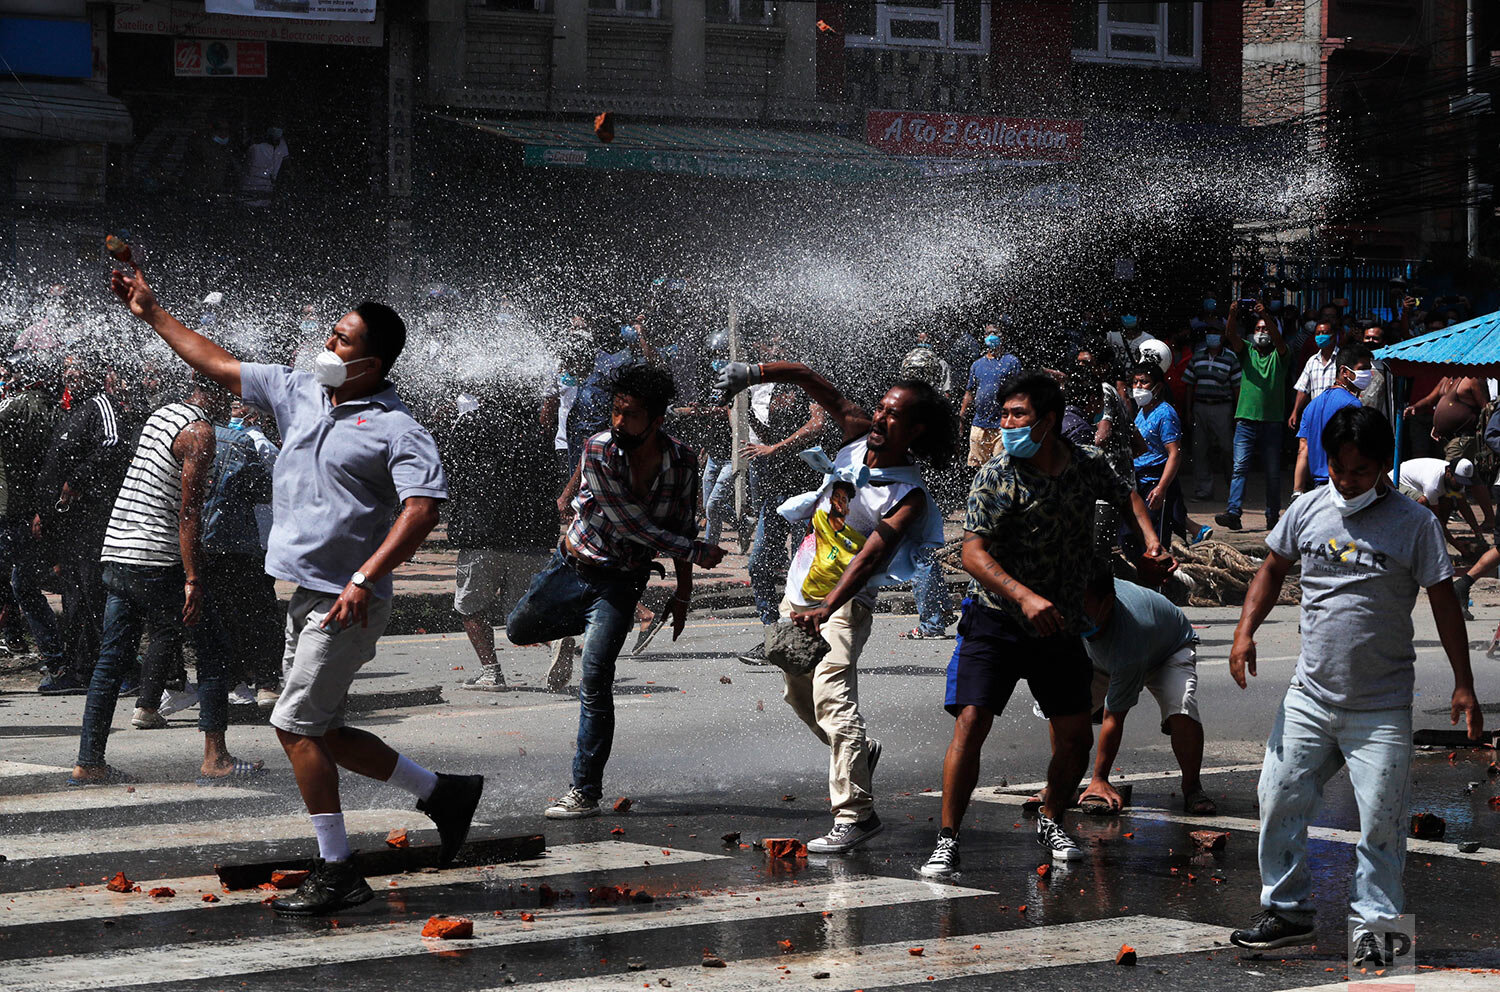  Nepalese protesters defying a government coronavirus lockdown to take part in a religious festival clash with riot police, in Lalitpur, Nepal, Thursday, Sept. 3, 2020. (AP Photo/Niranjan Shrestha) 